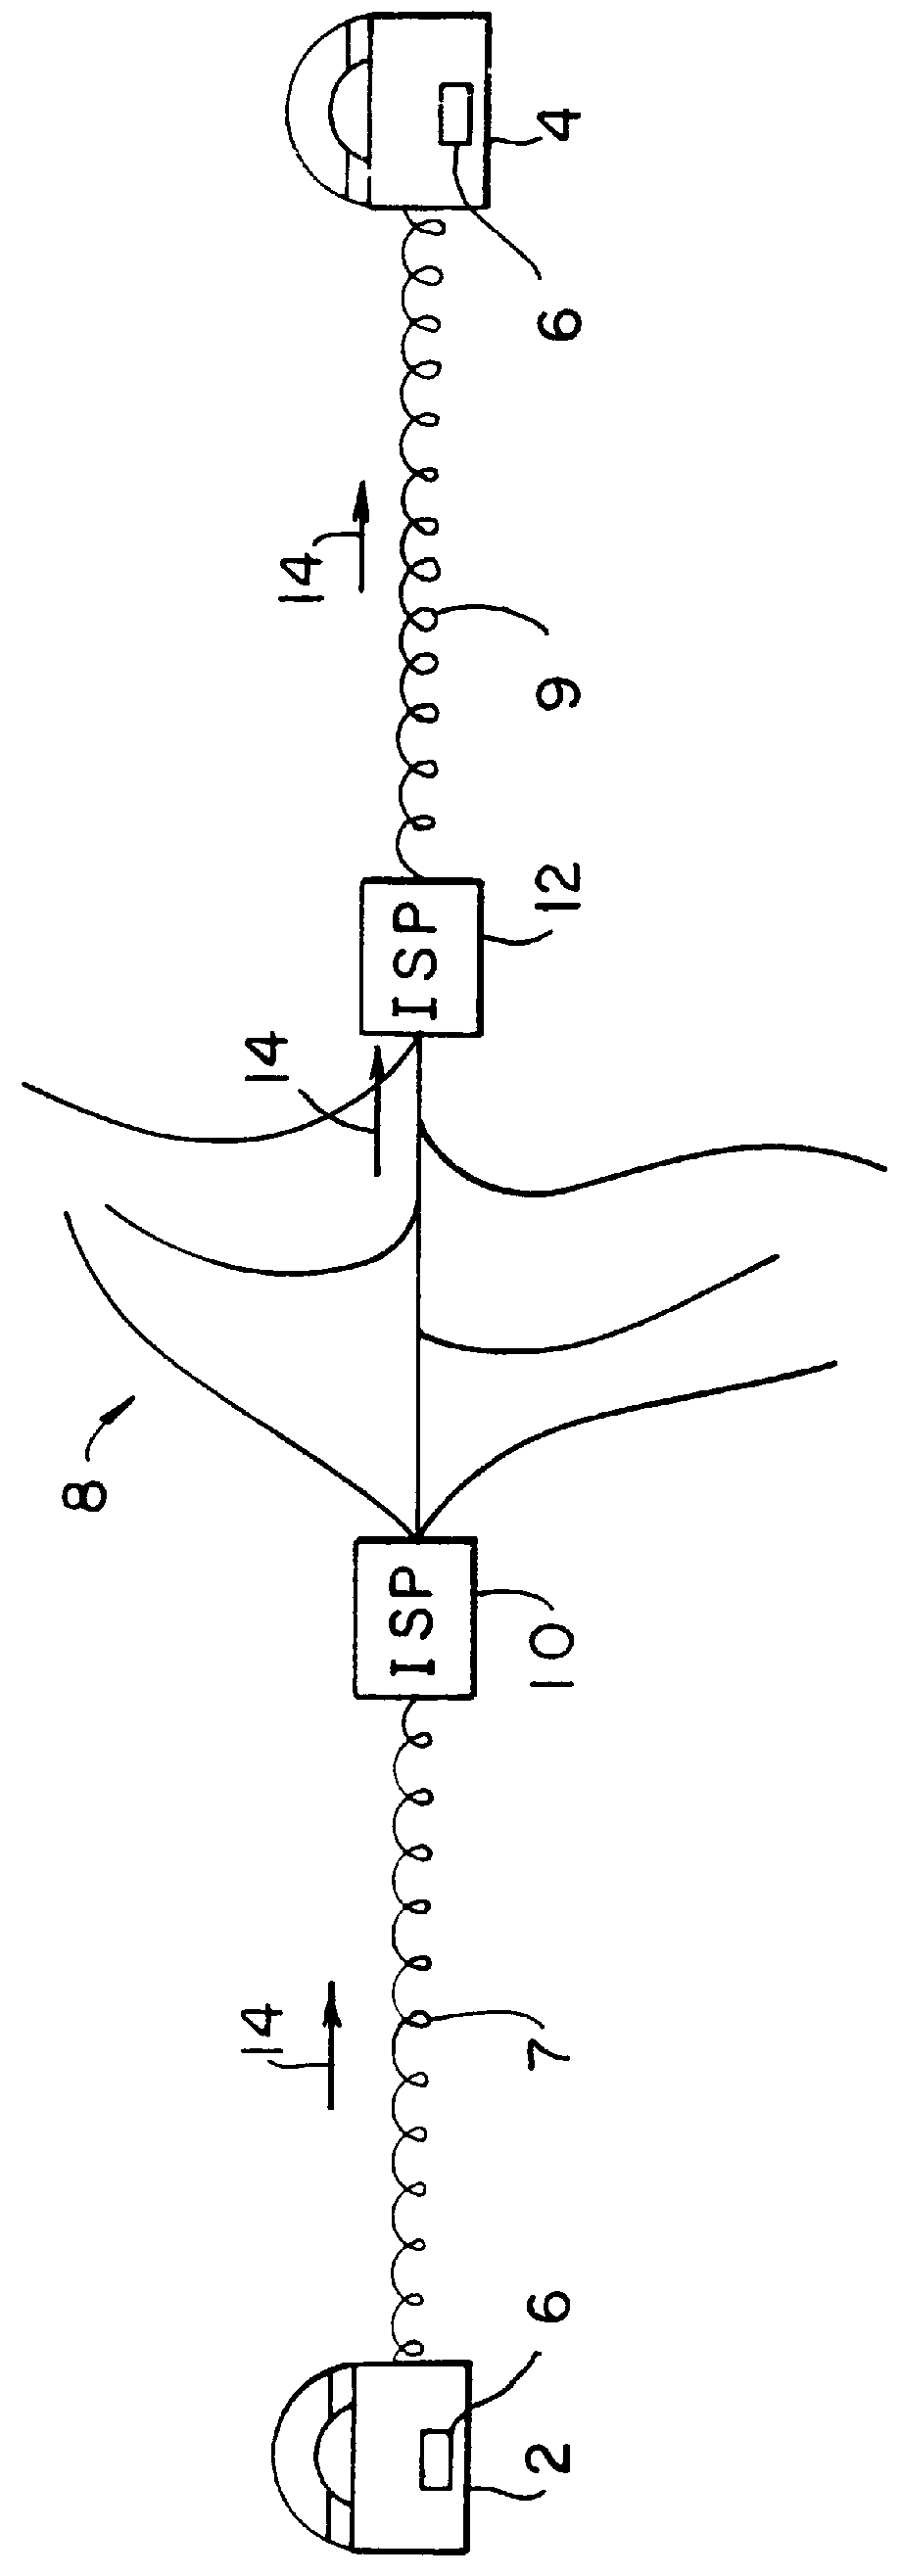 Telephonic systems for communication over computer networks